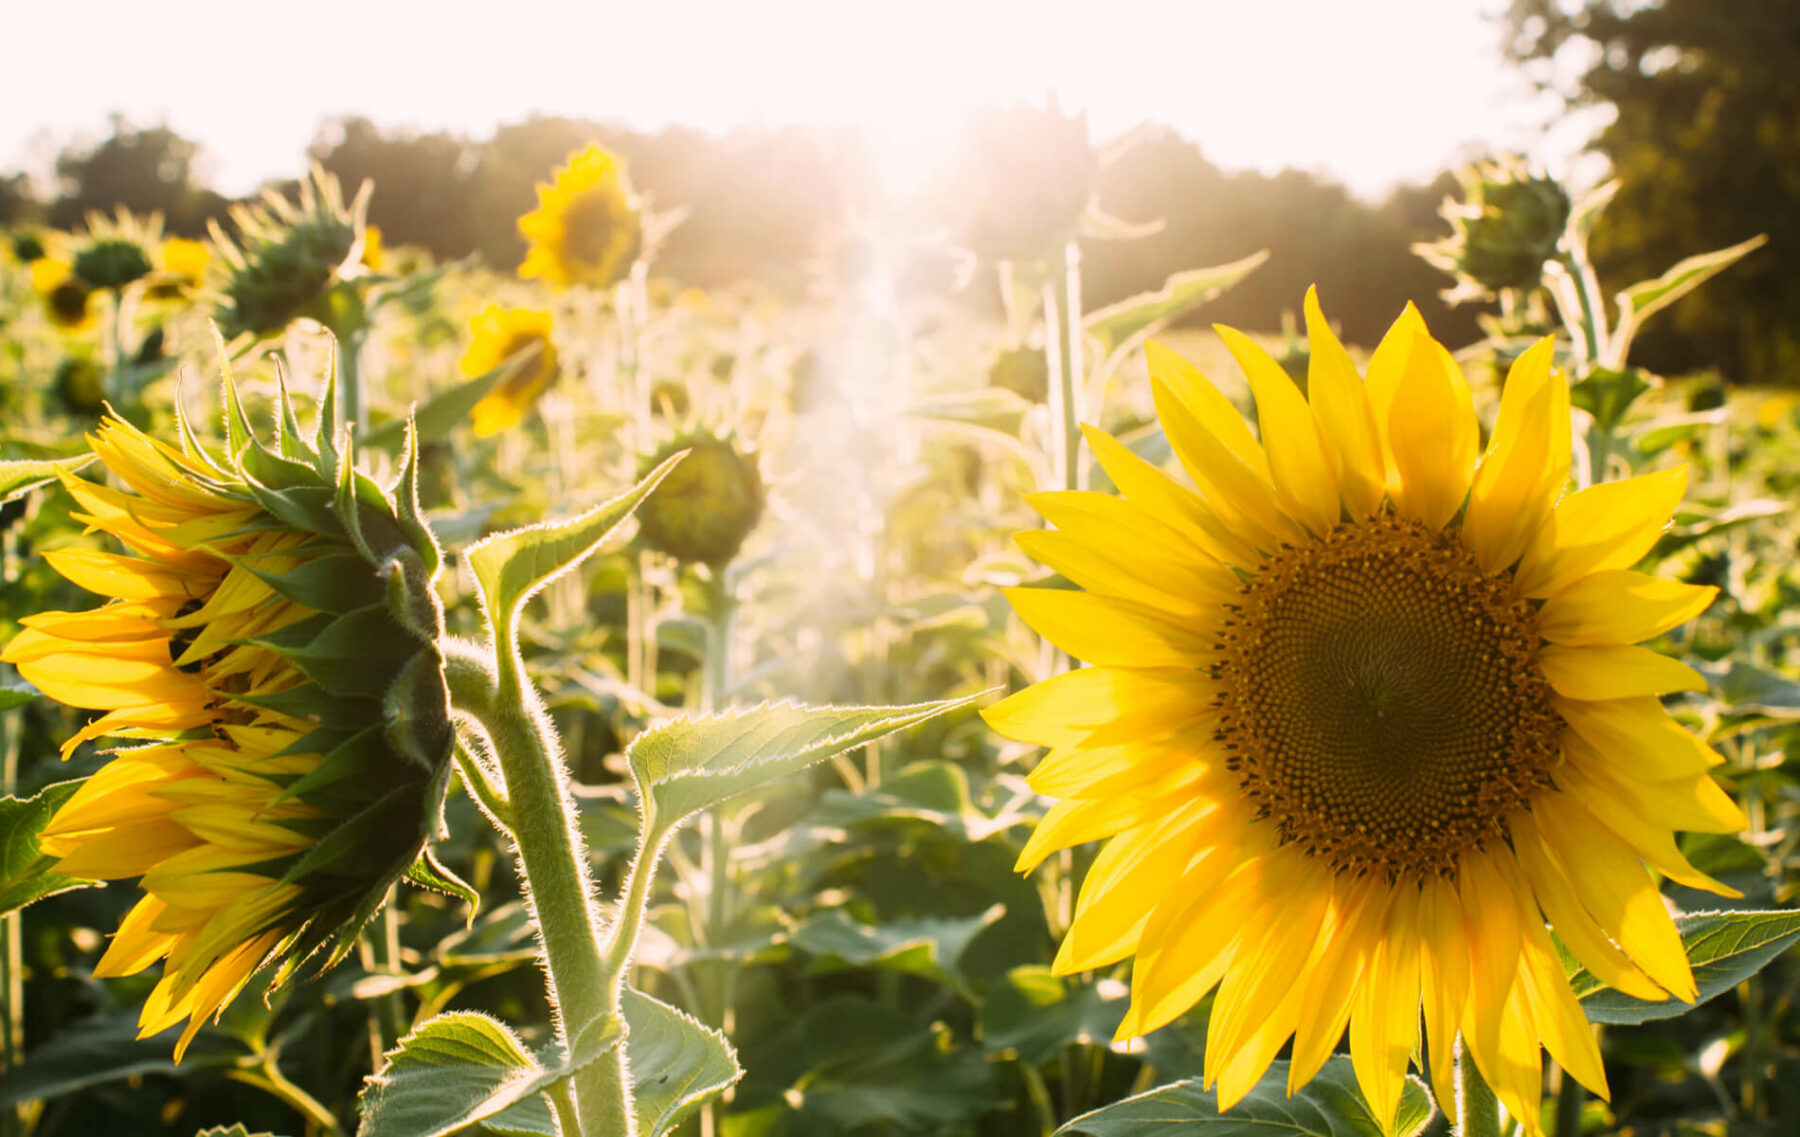 a large sunflower in a field of sunflowers.